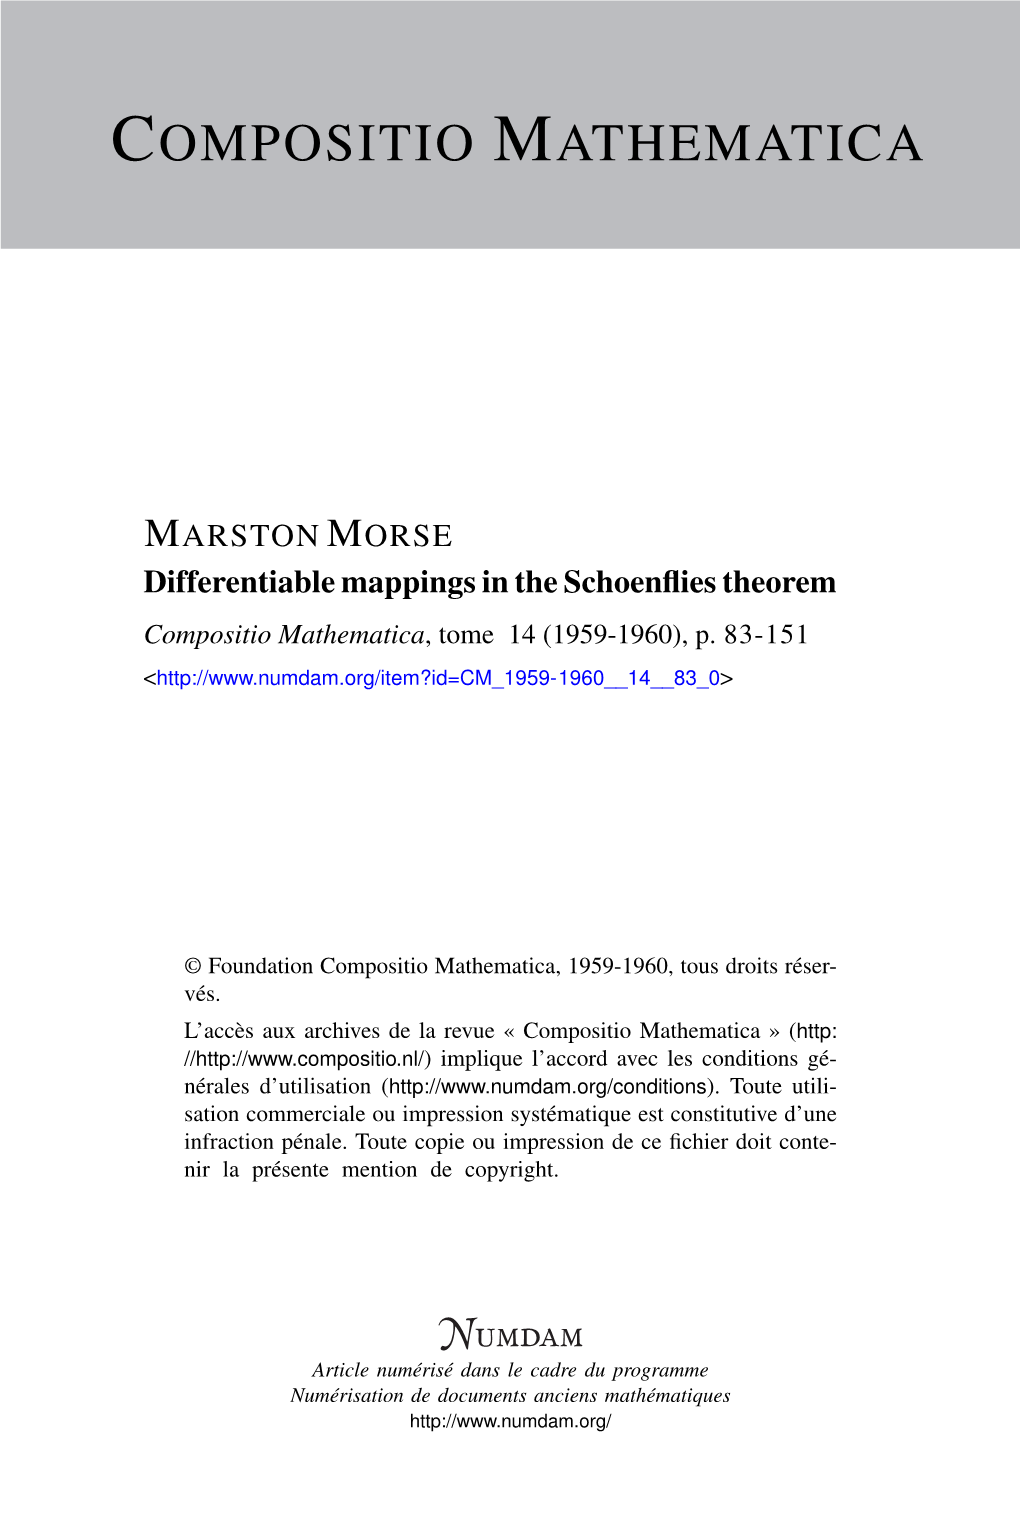 Differentiable Mappings in the Schoenflies Theorem